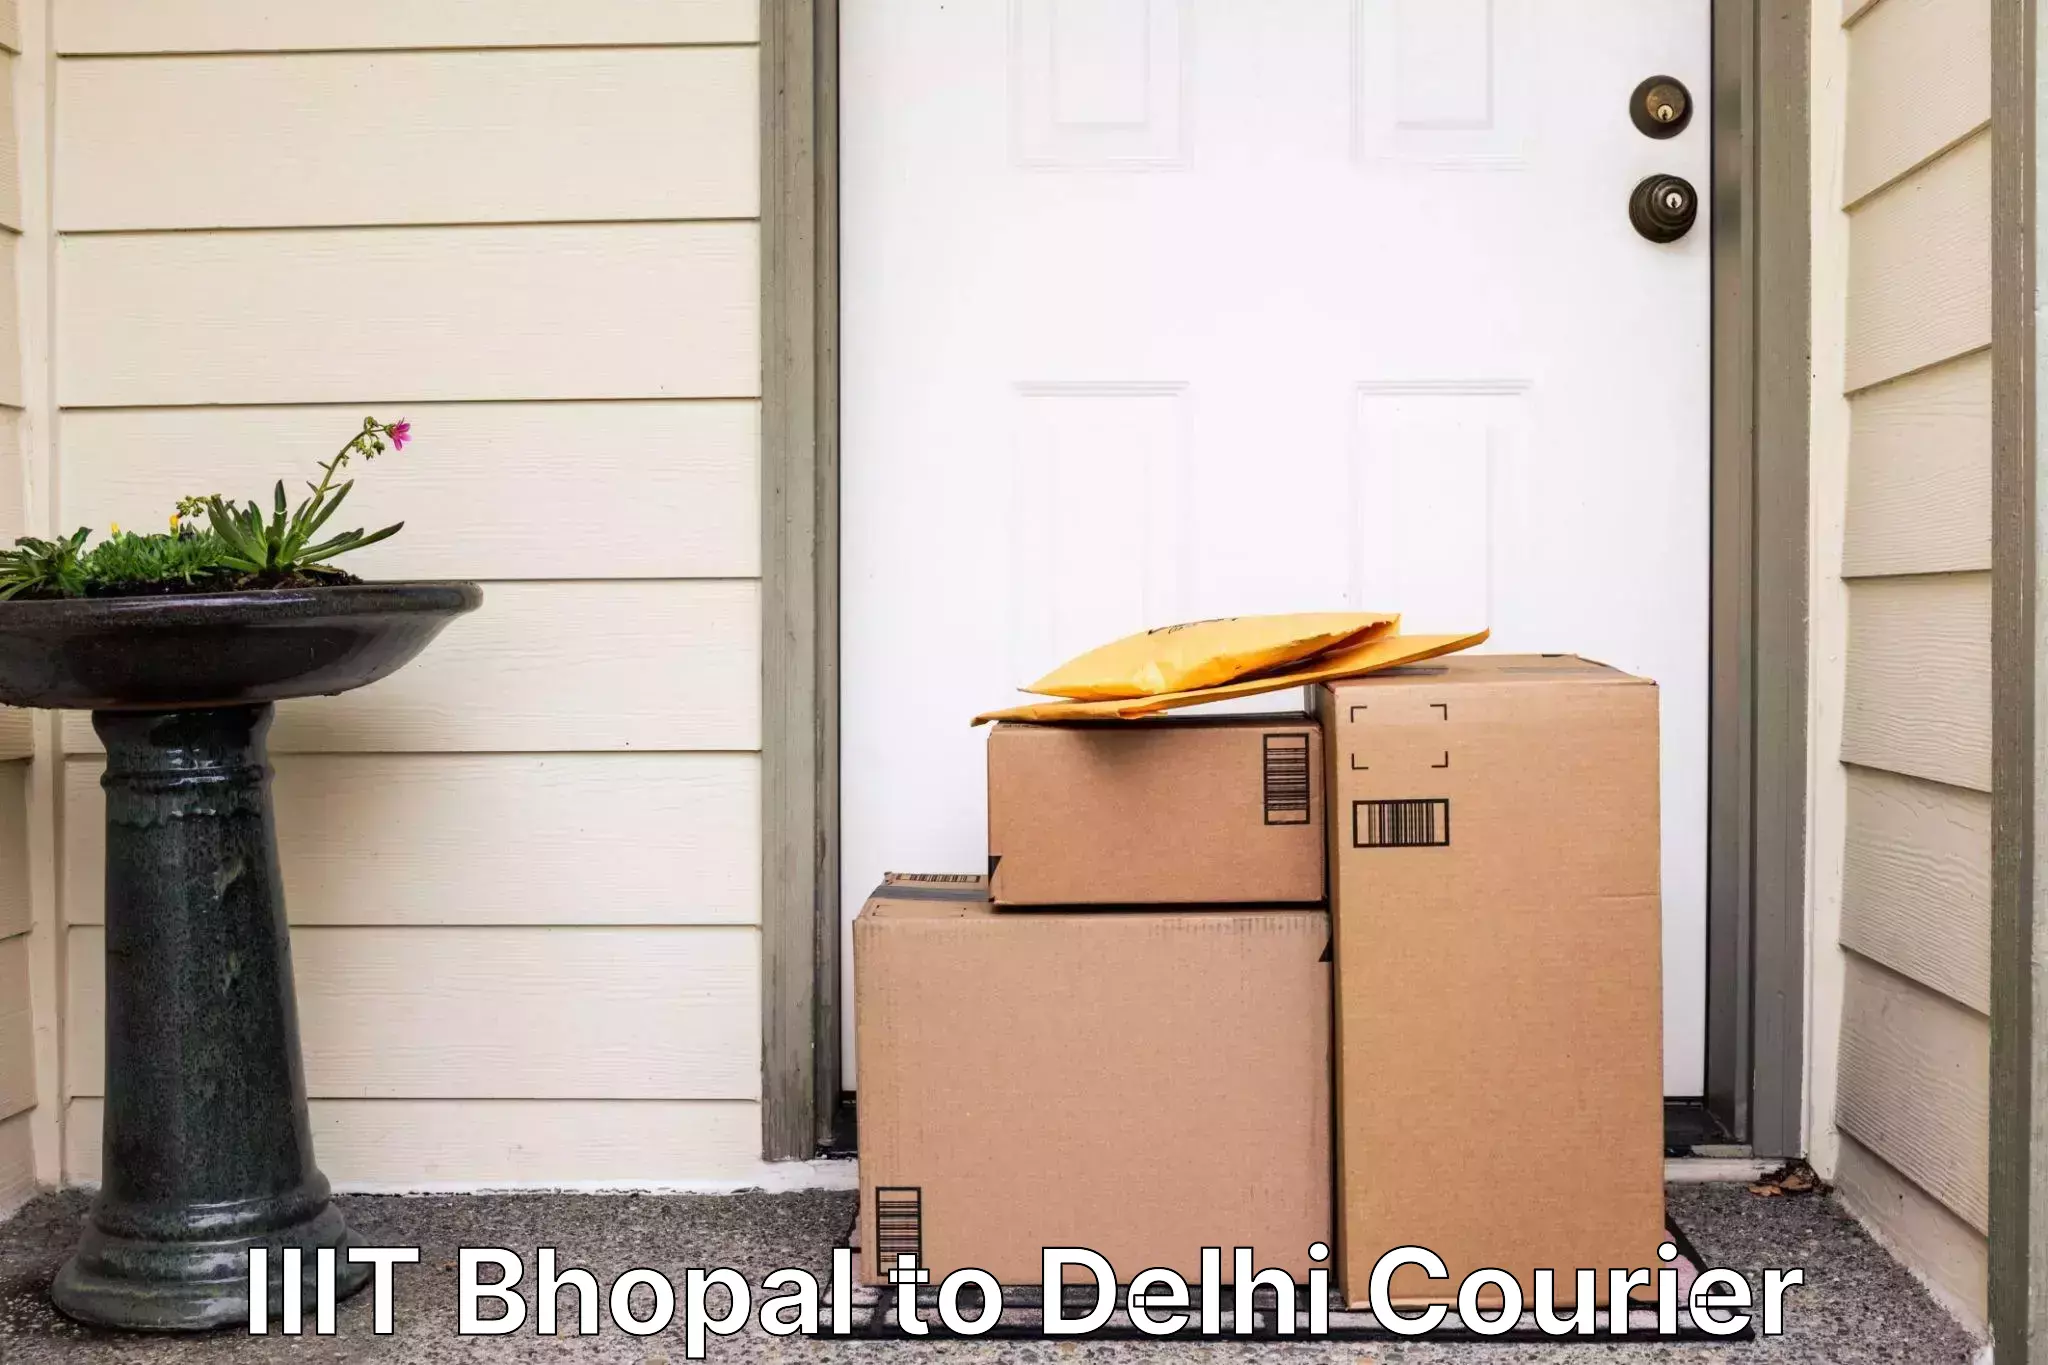 24-hour courier services IIIT Bhopal to Delhi